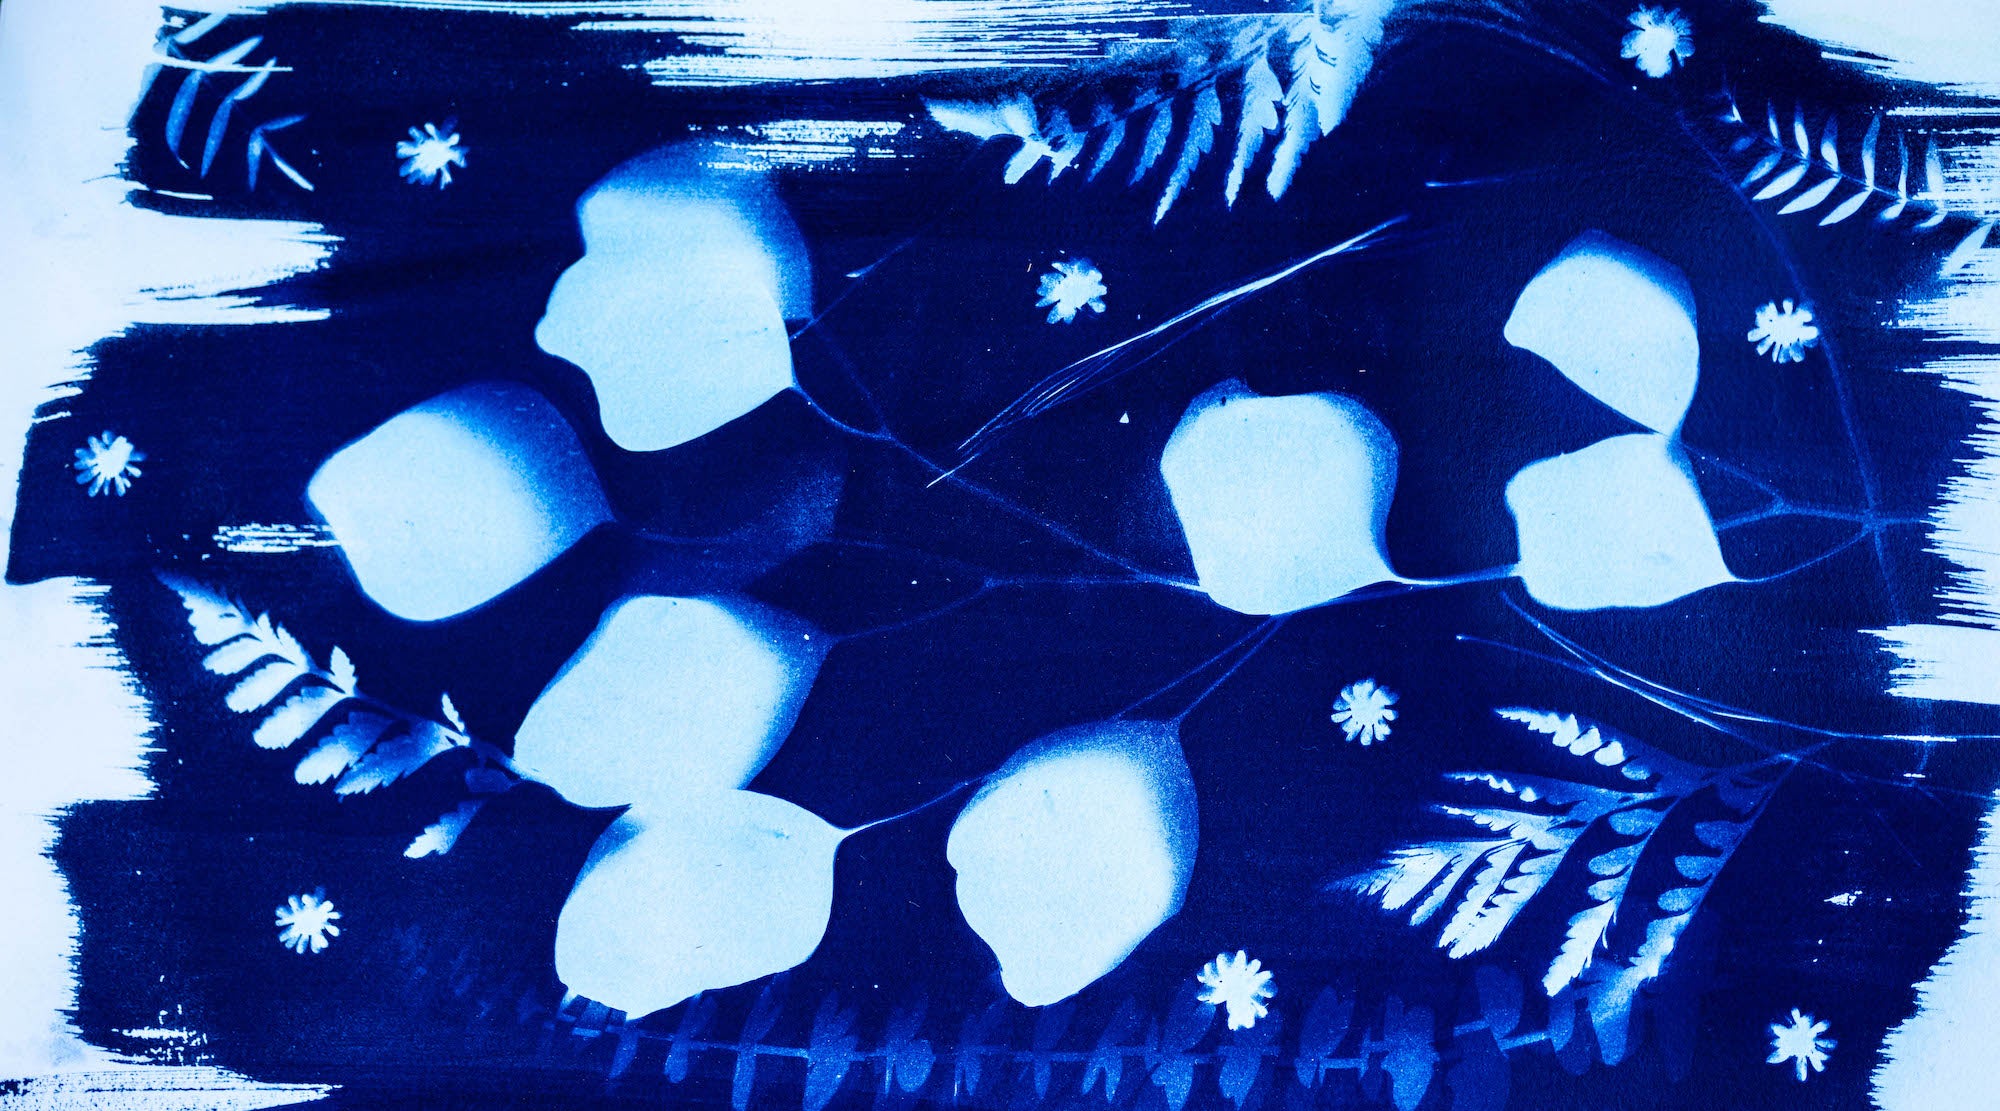 CYANOTYPE ~ EXPLORING THE REALM OF LIGHT